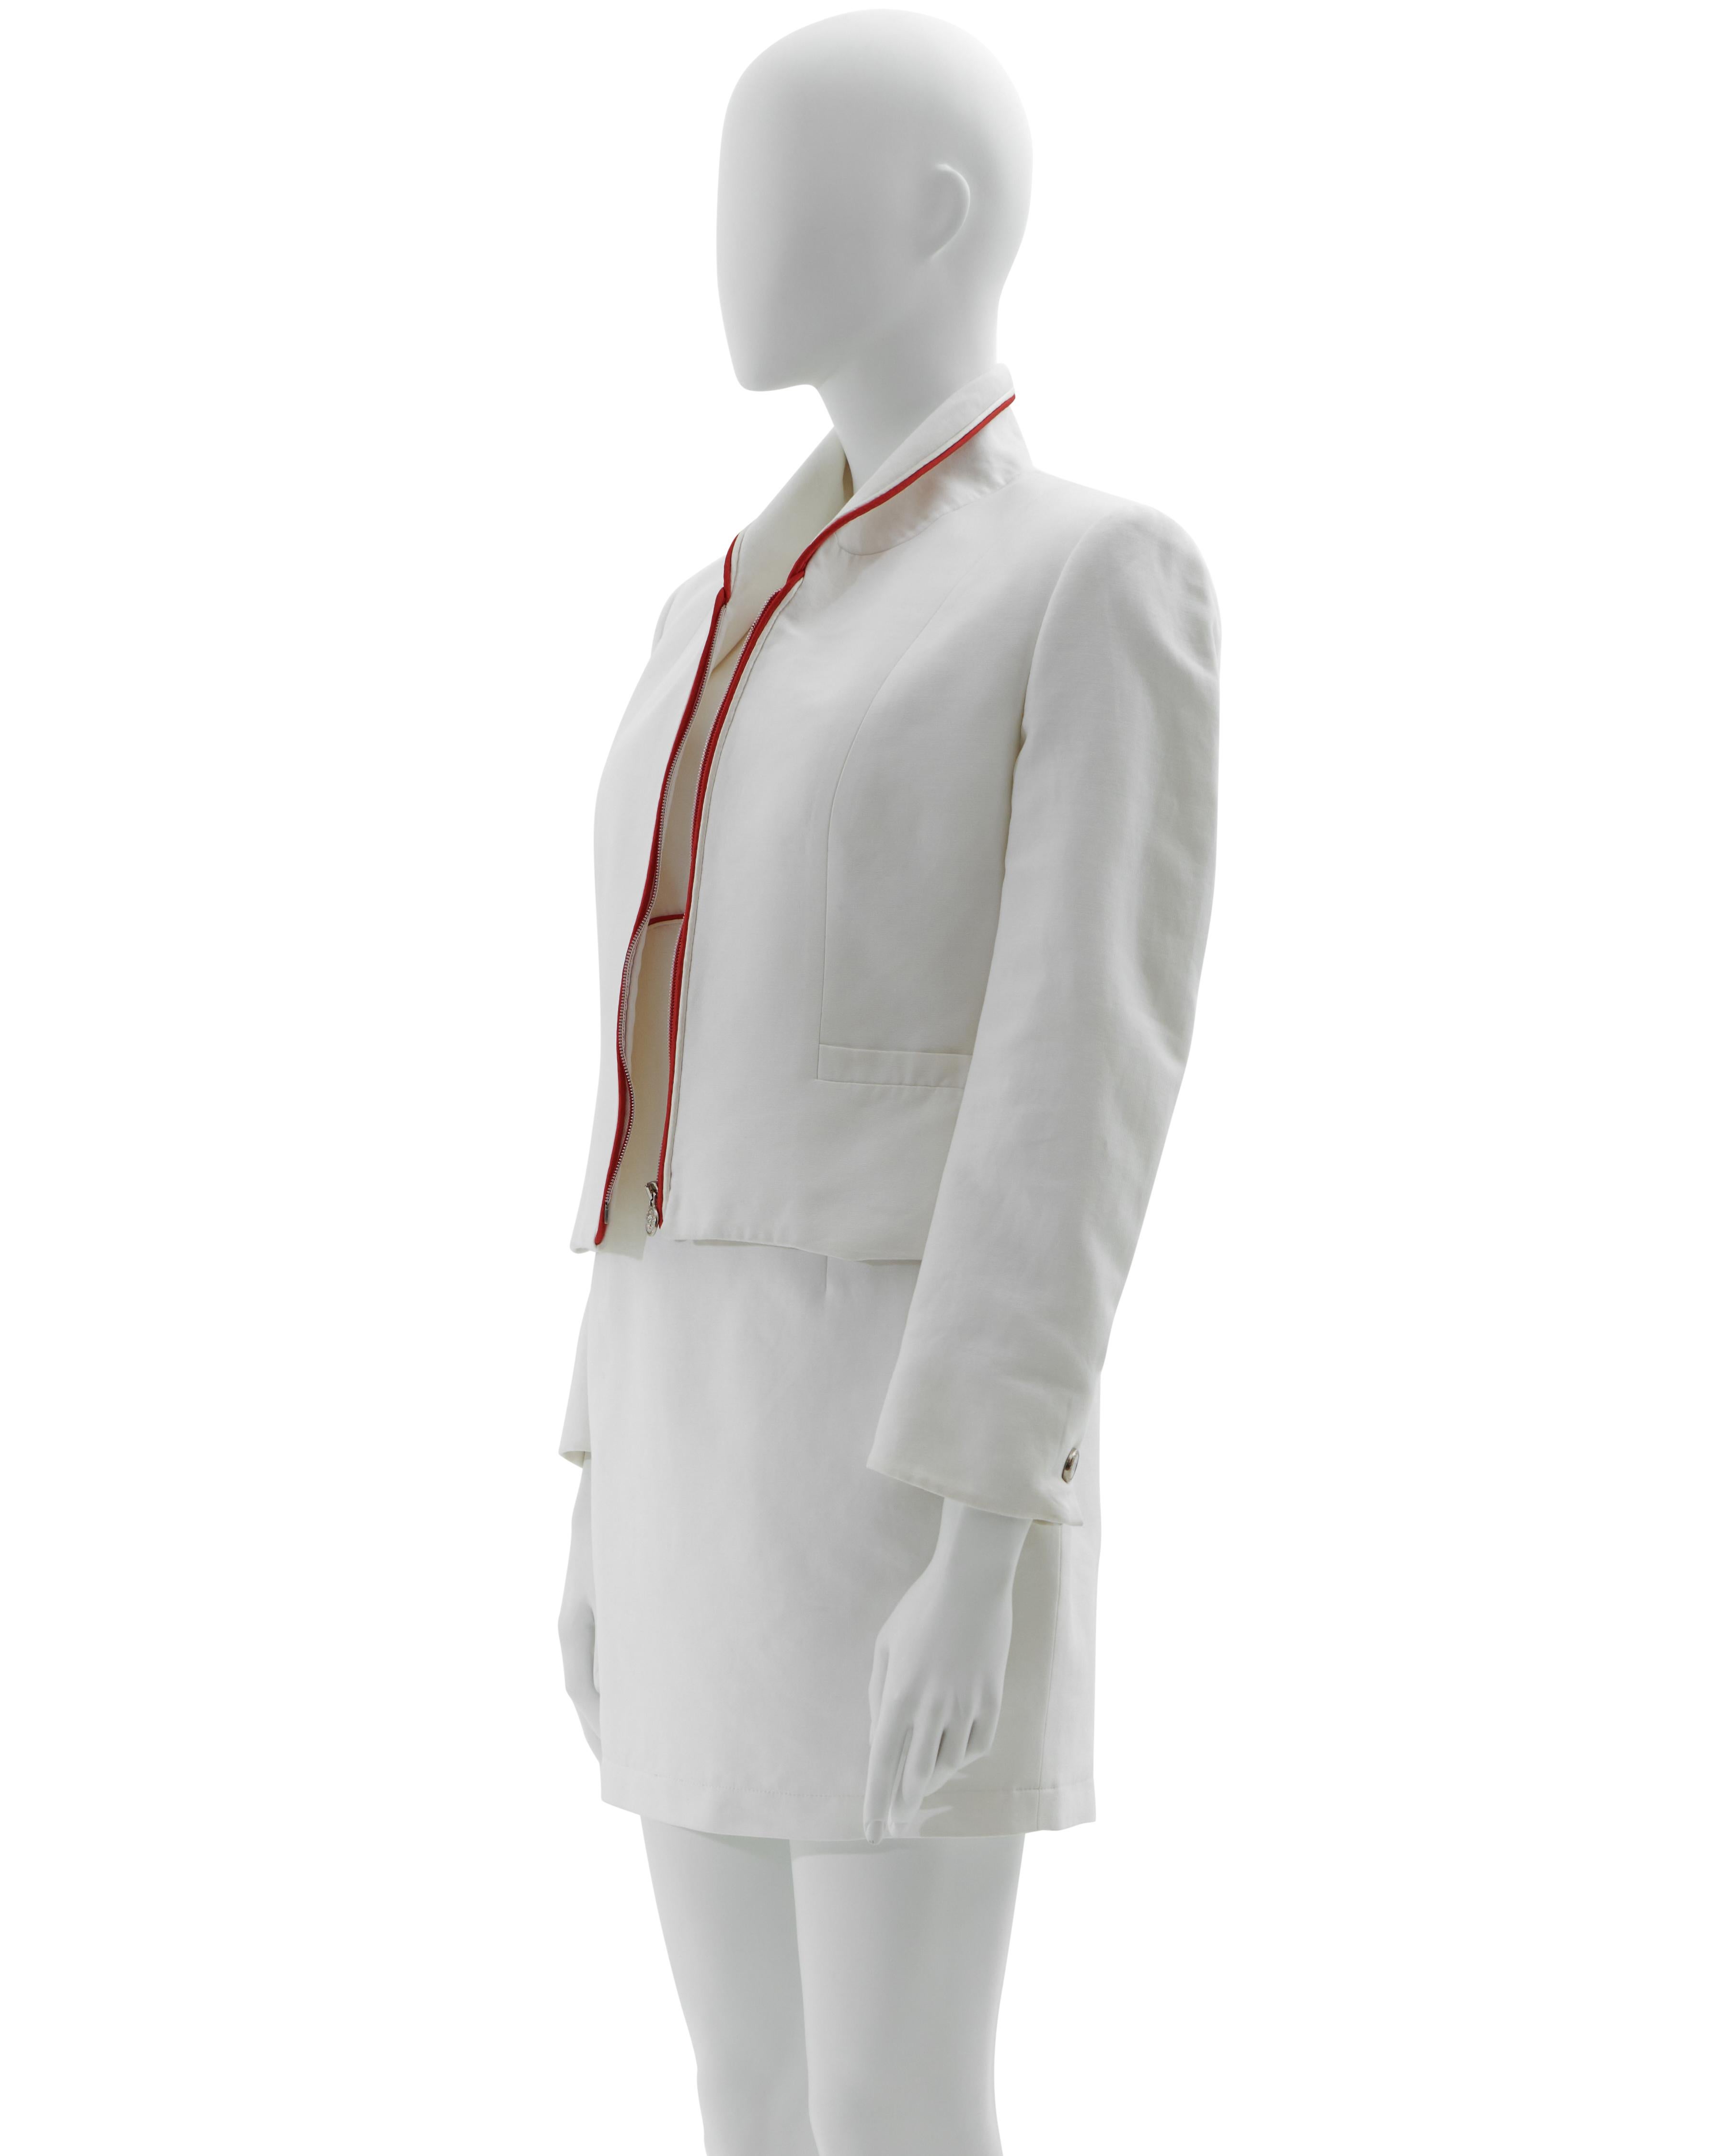 - Early 1990s 
- Sold by Skof.Archive
- Designed by Gianni Versace
- Versus by Gianni Versace
- White cotton with red profile jacket and dress set
- Medusa zipper front detail on the jacket
- Dress back hidden zipper closure
- Snap Jacket buttons 
-